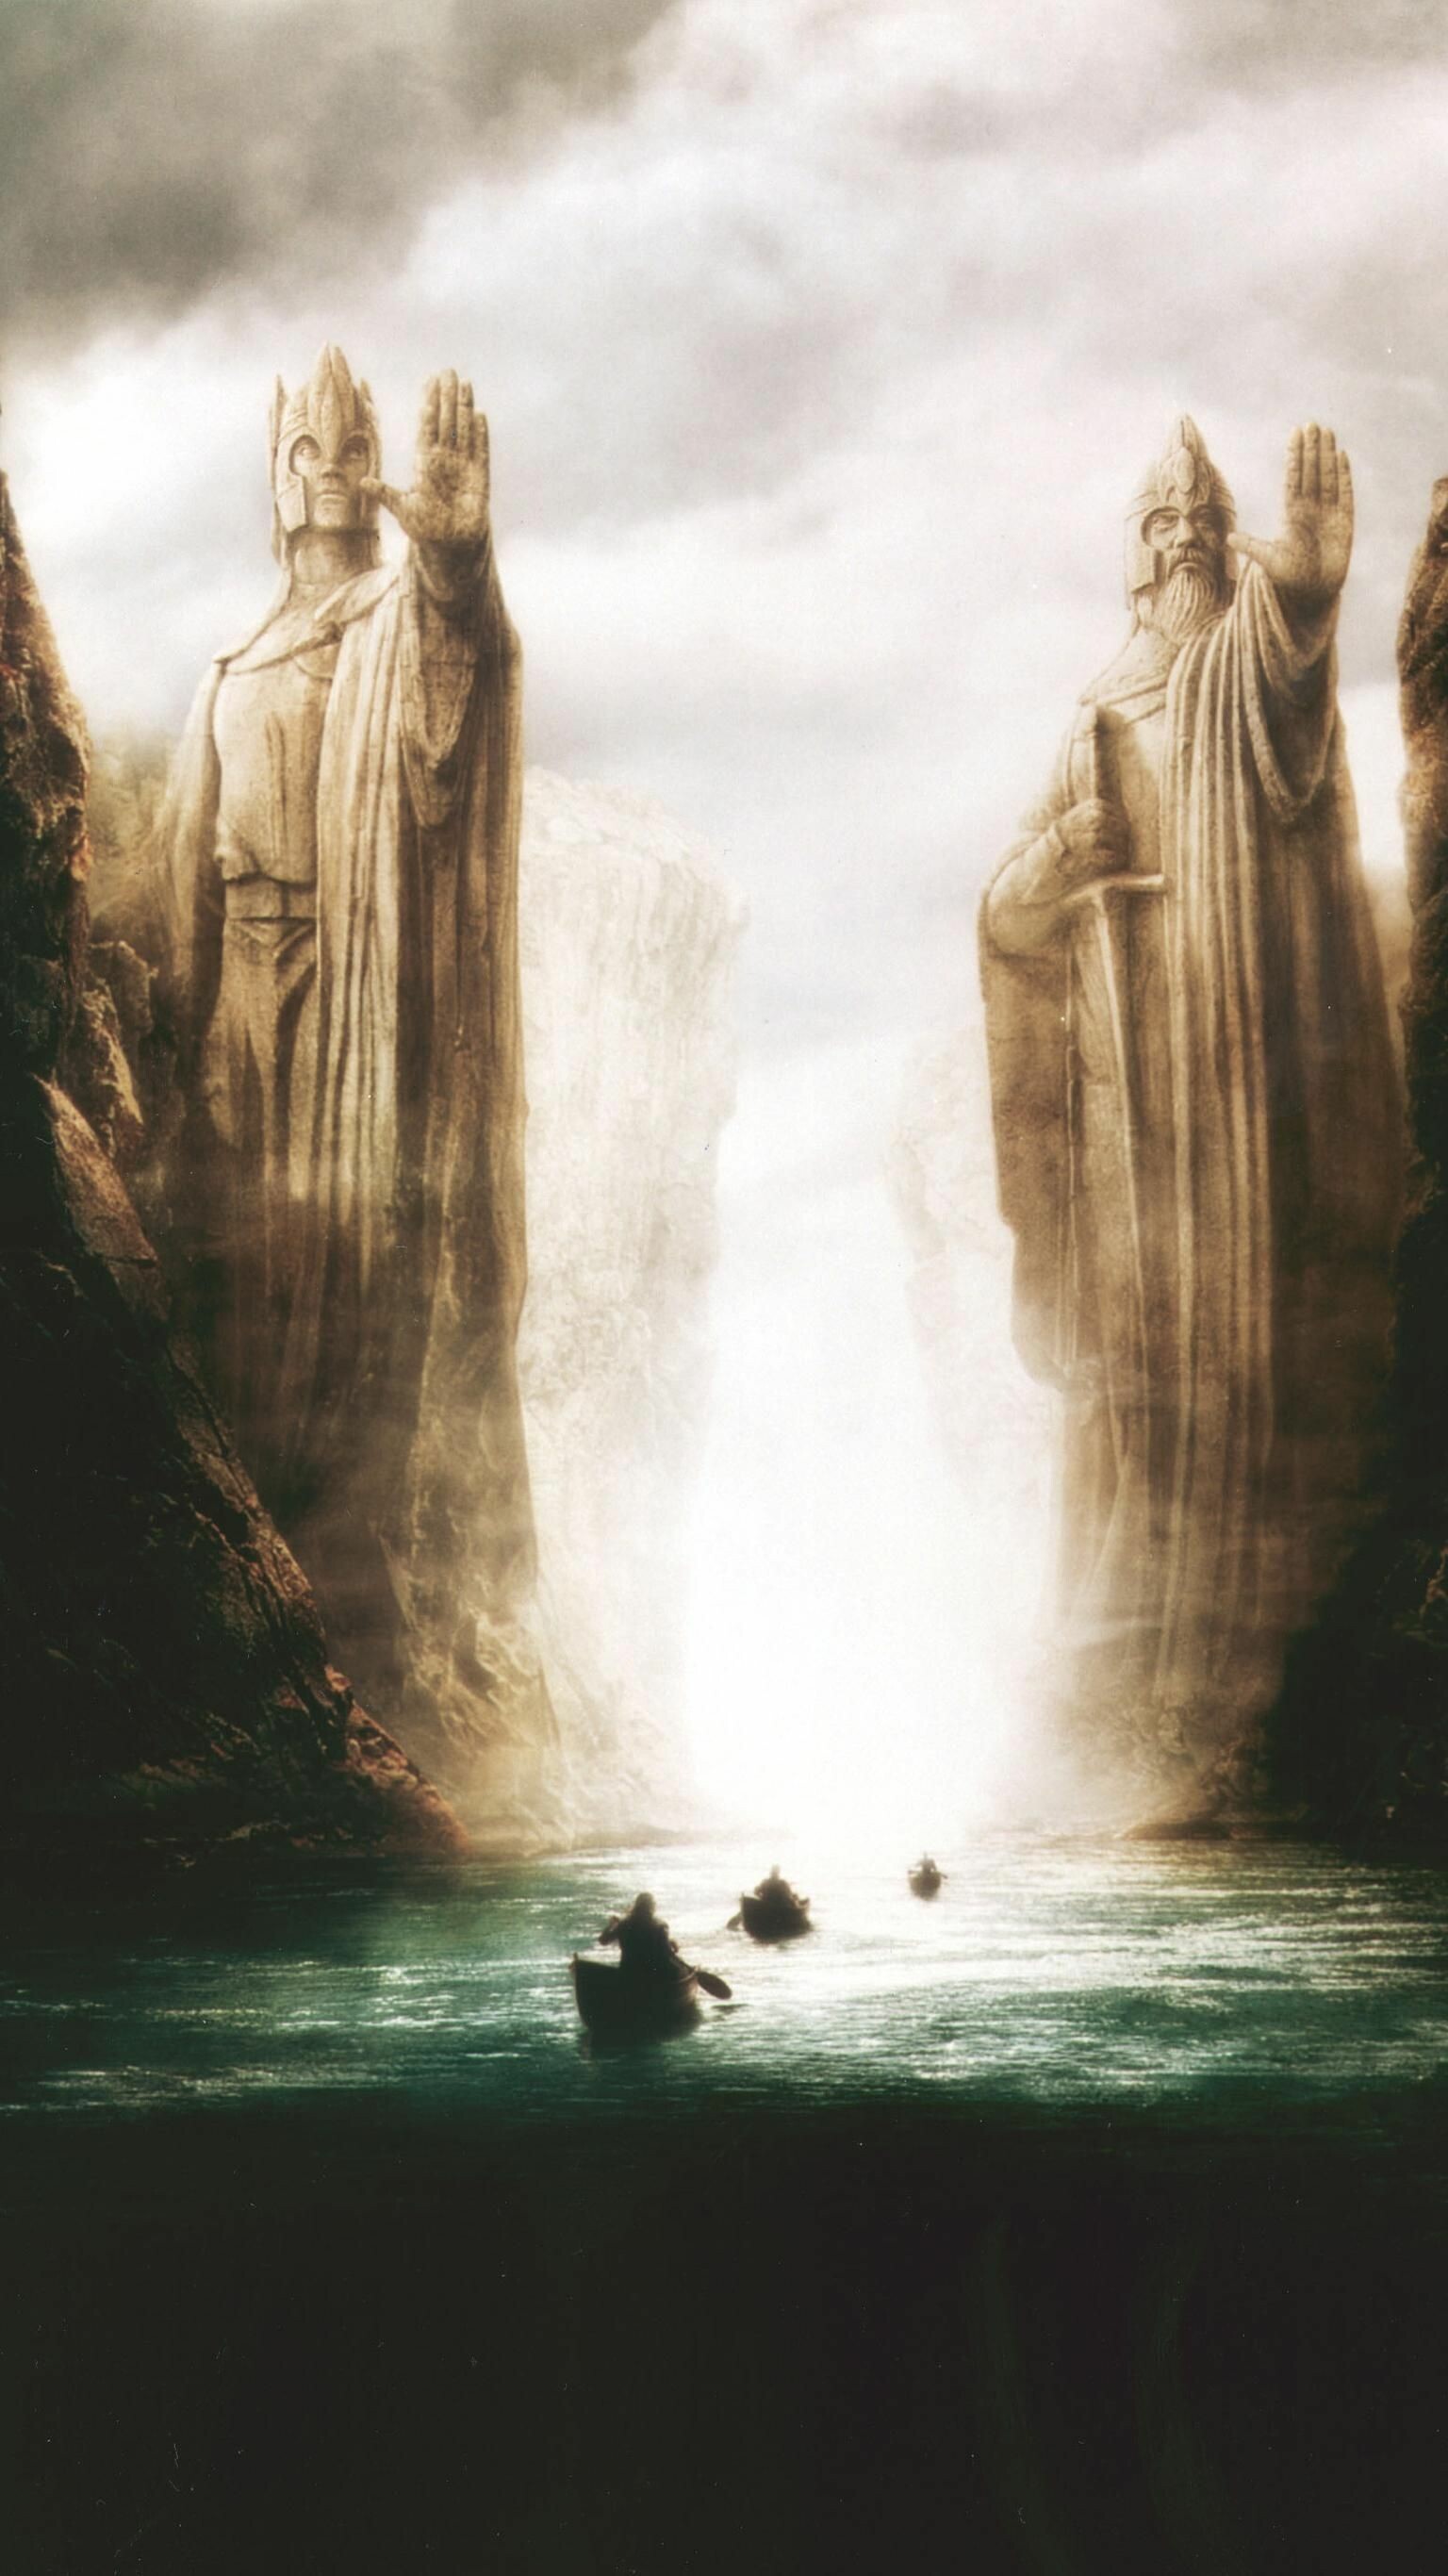 The Lord of the Rings: The Fellowship of the Ring, A 2001 epic fantasy adventure film directed by Peter Jackson. 1540x2740 HD Background.